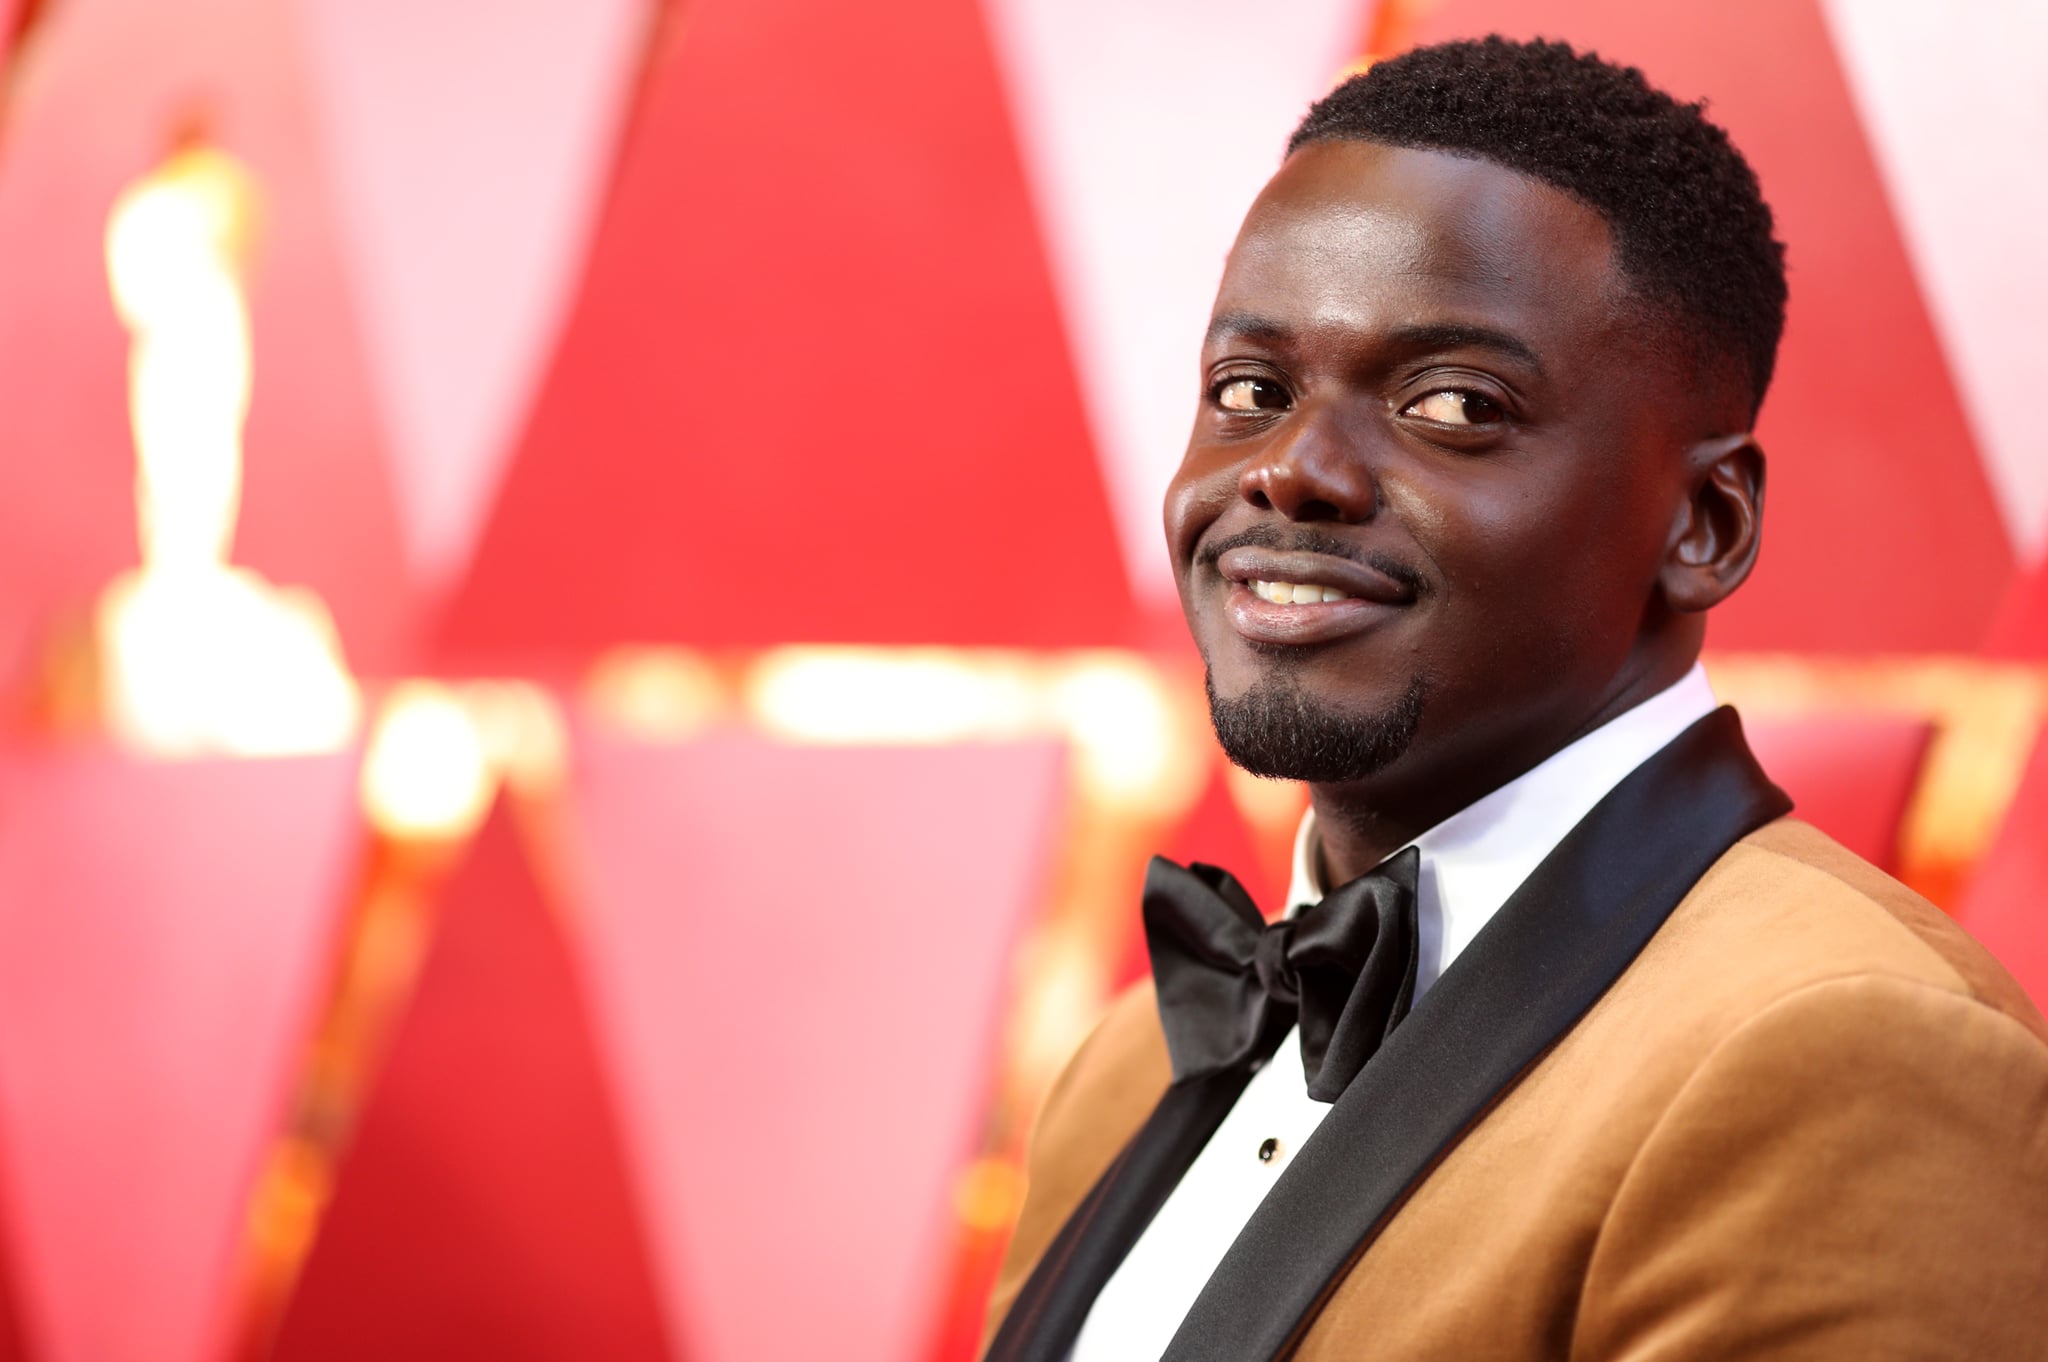 HOLLYWOOD, CA - MARCH 04:  Daniel Kaluuya attends the 90th Annual Academy Awards at Hollywood & Highland centre on March 4, 2018 in Hollywood, California.  (Photo by Christopher Polk/Getty Images)